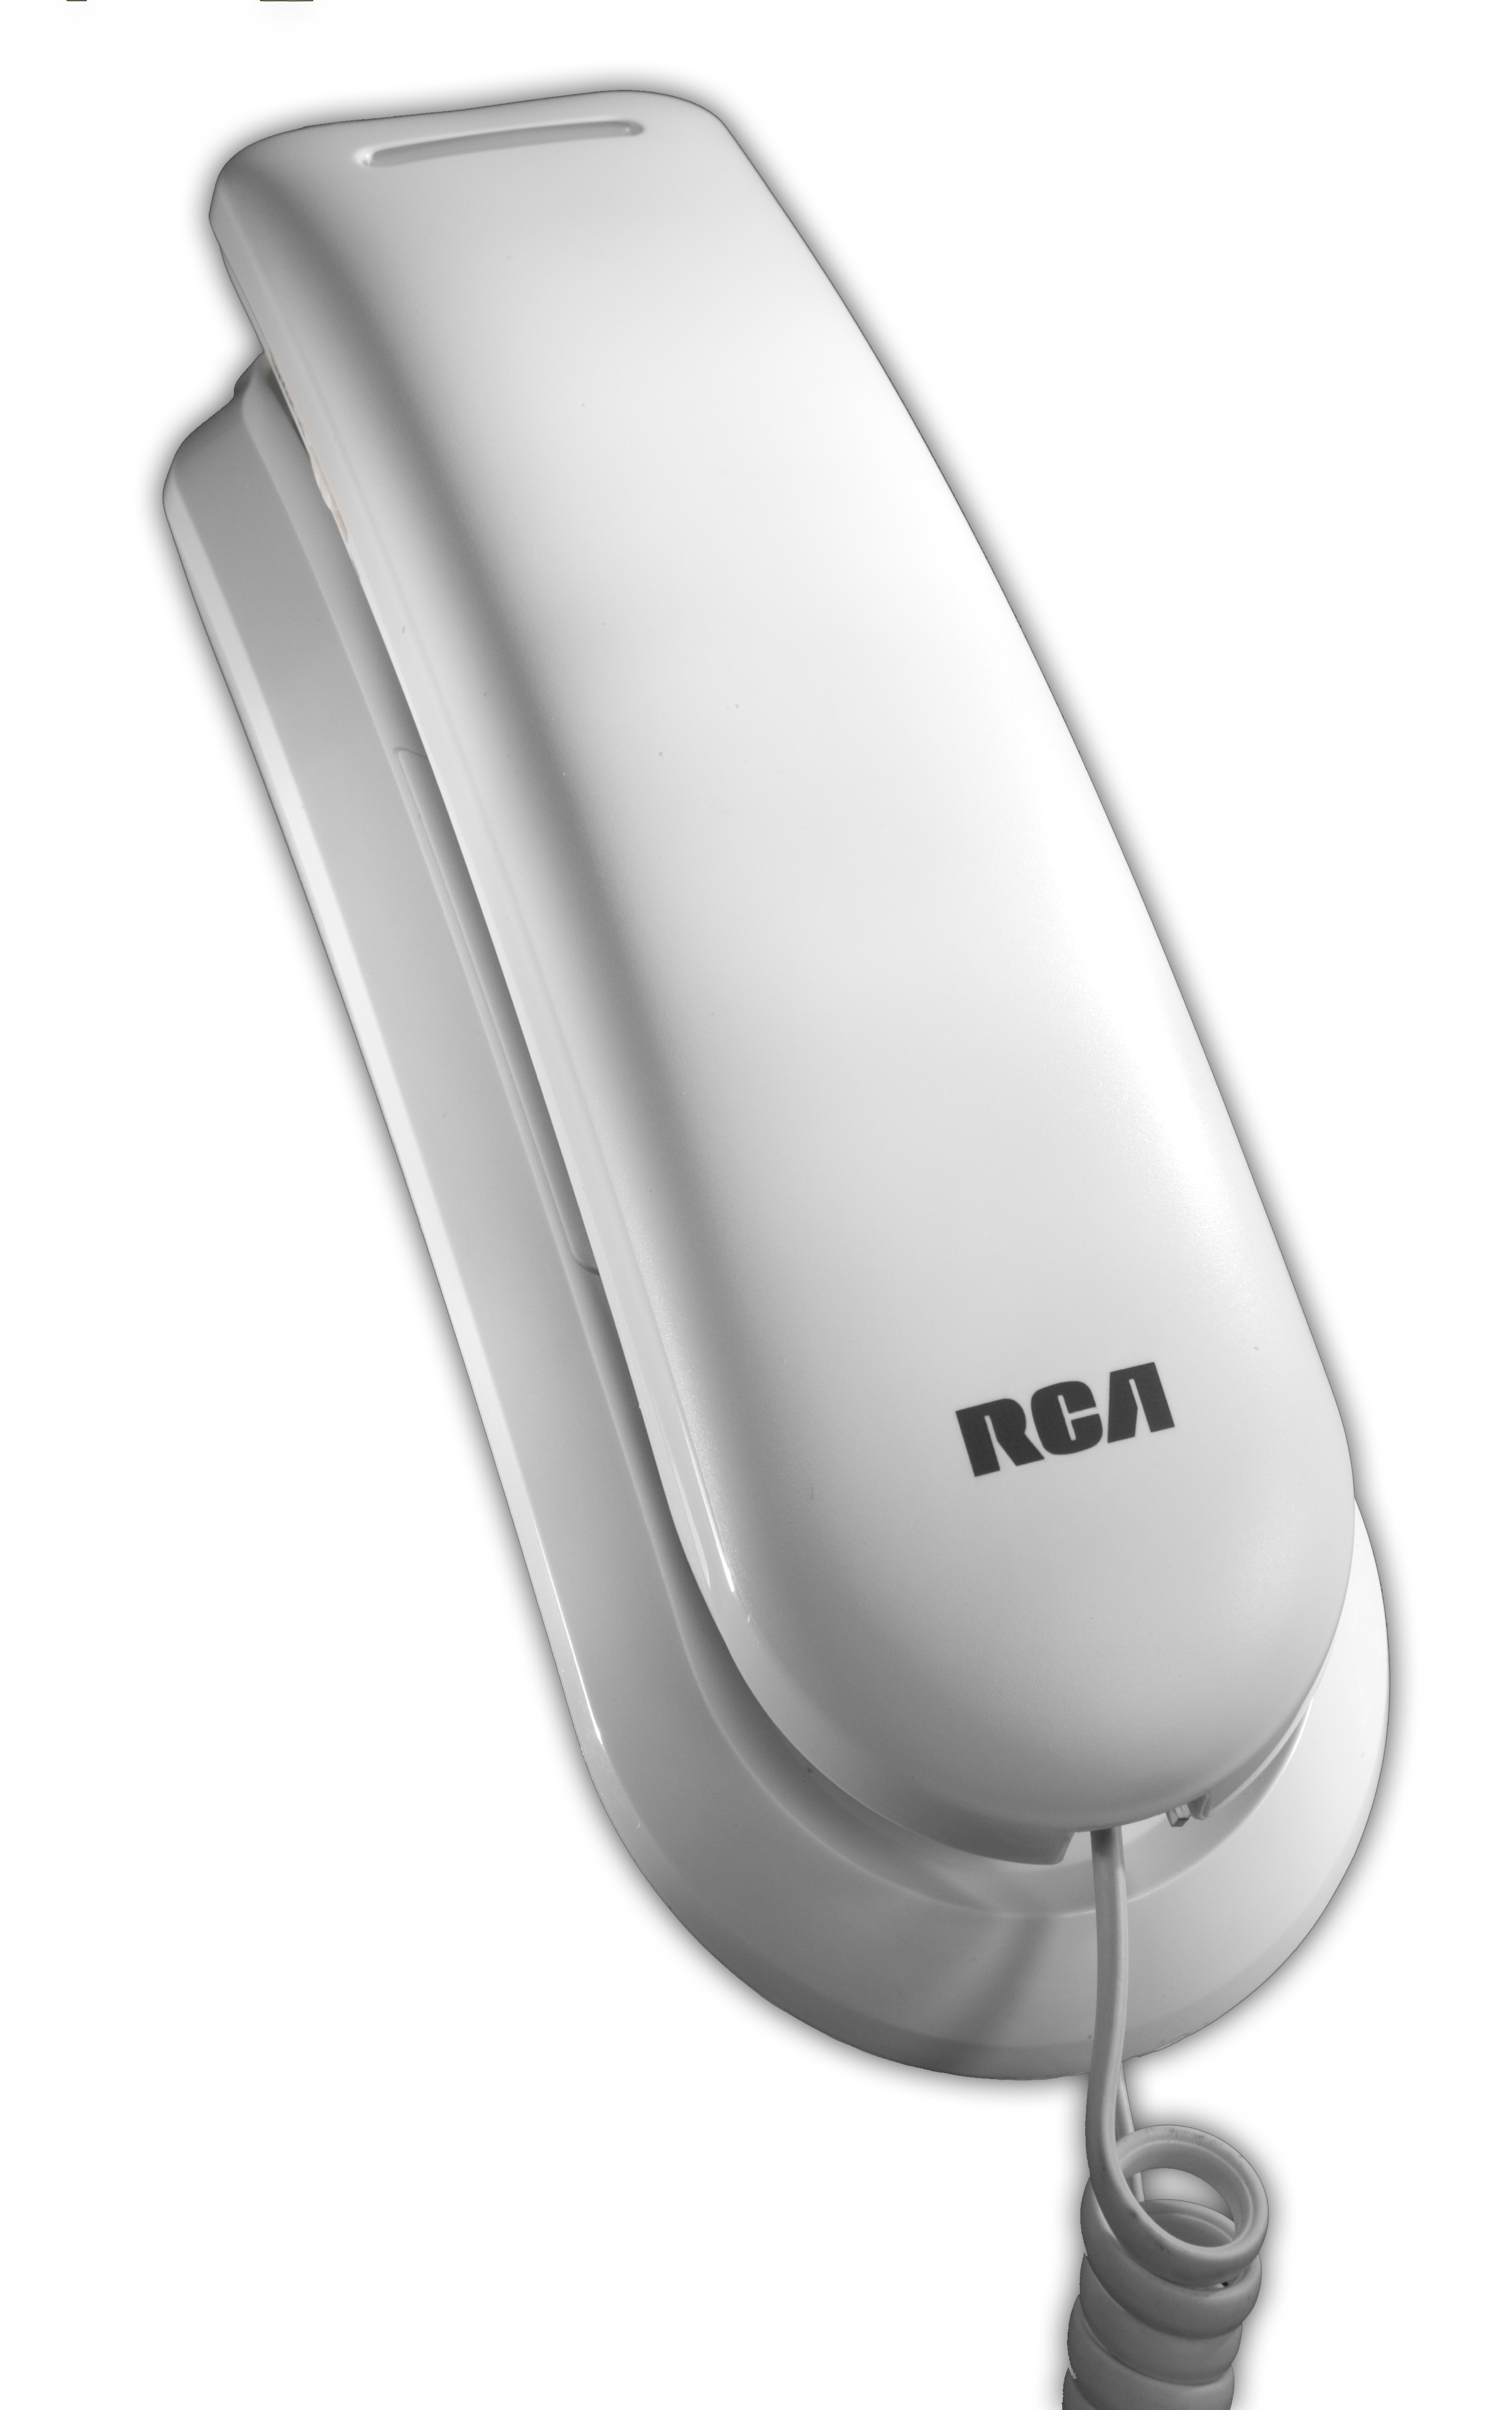 The RCA Model 1121 amplified corded phone is a quality, affordable phone for mild hearing loss.